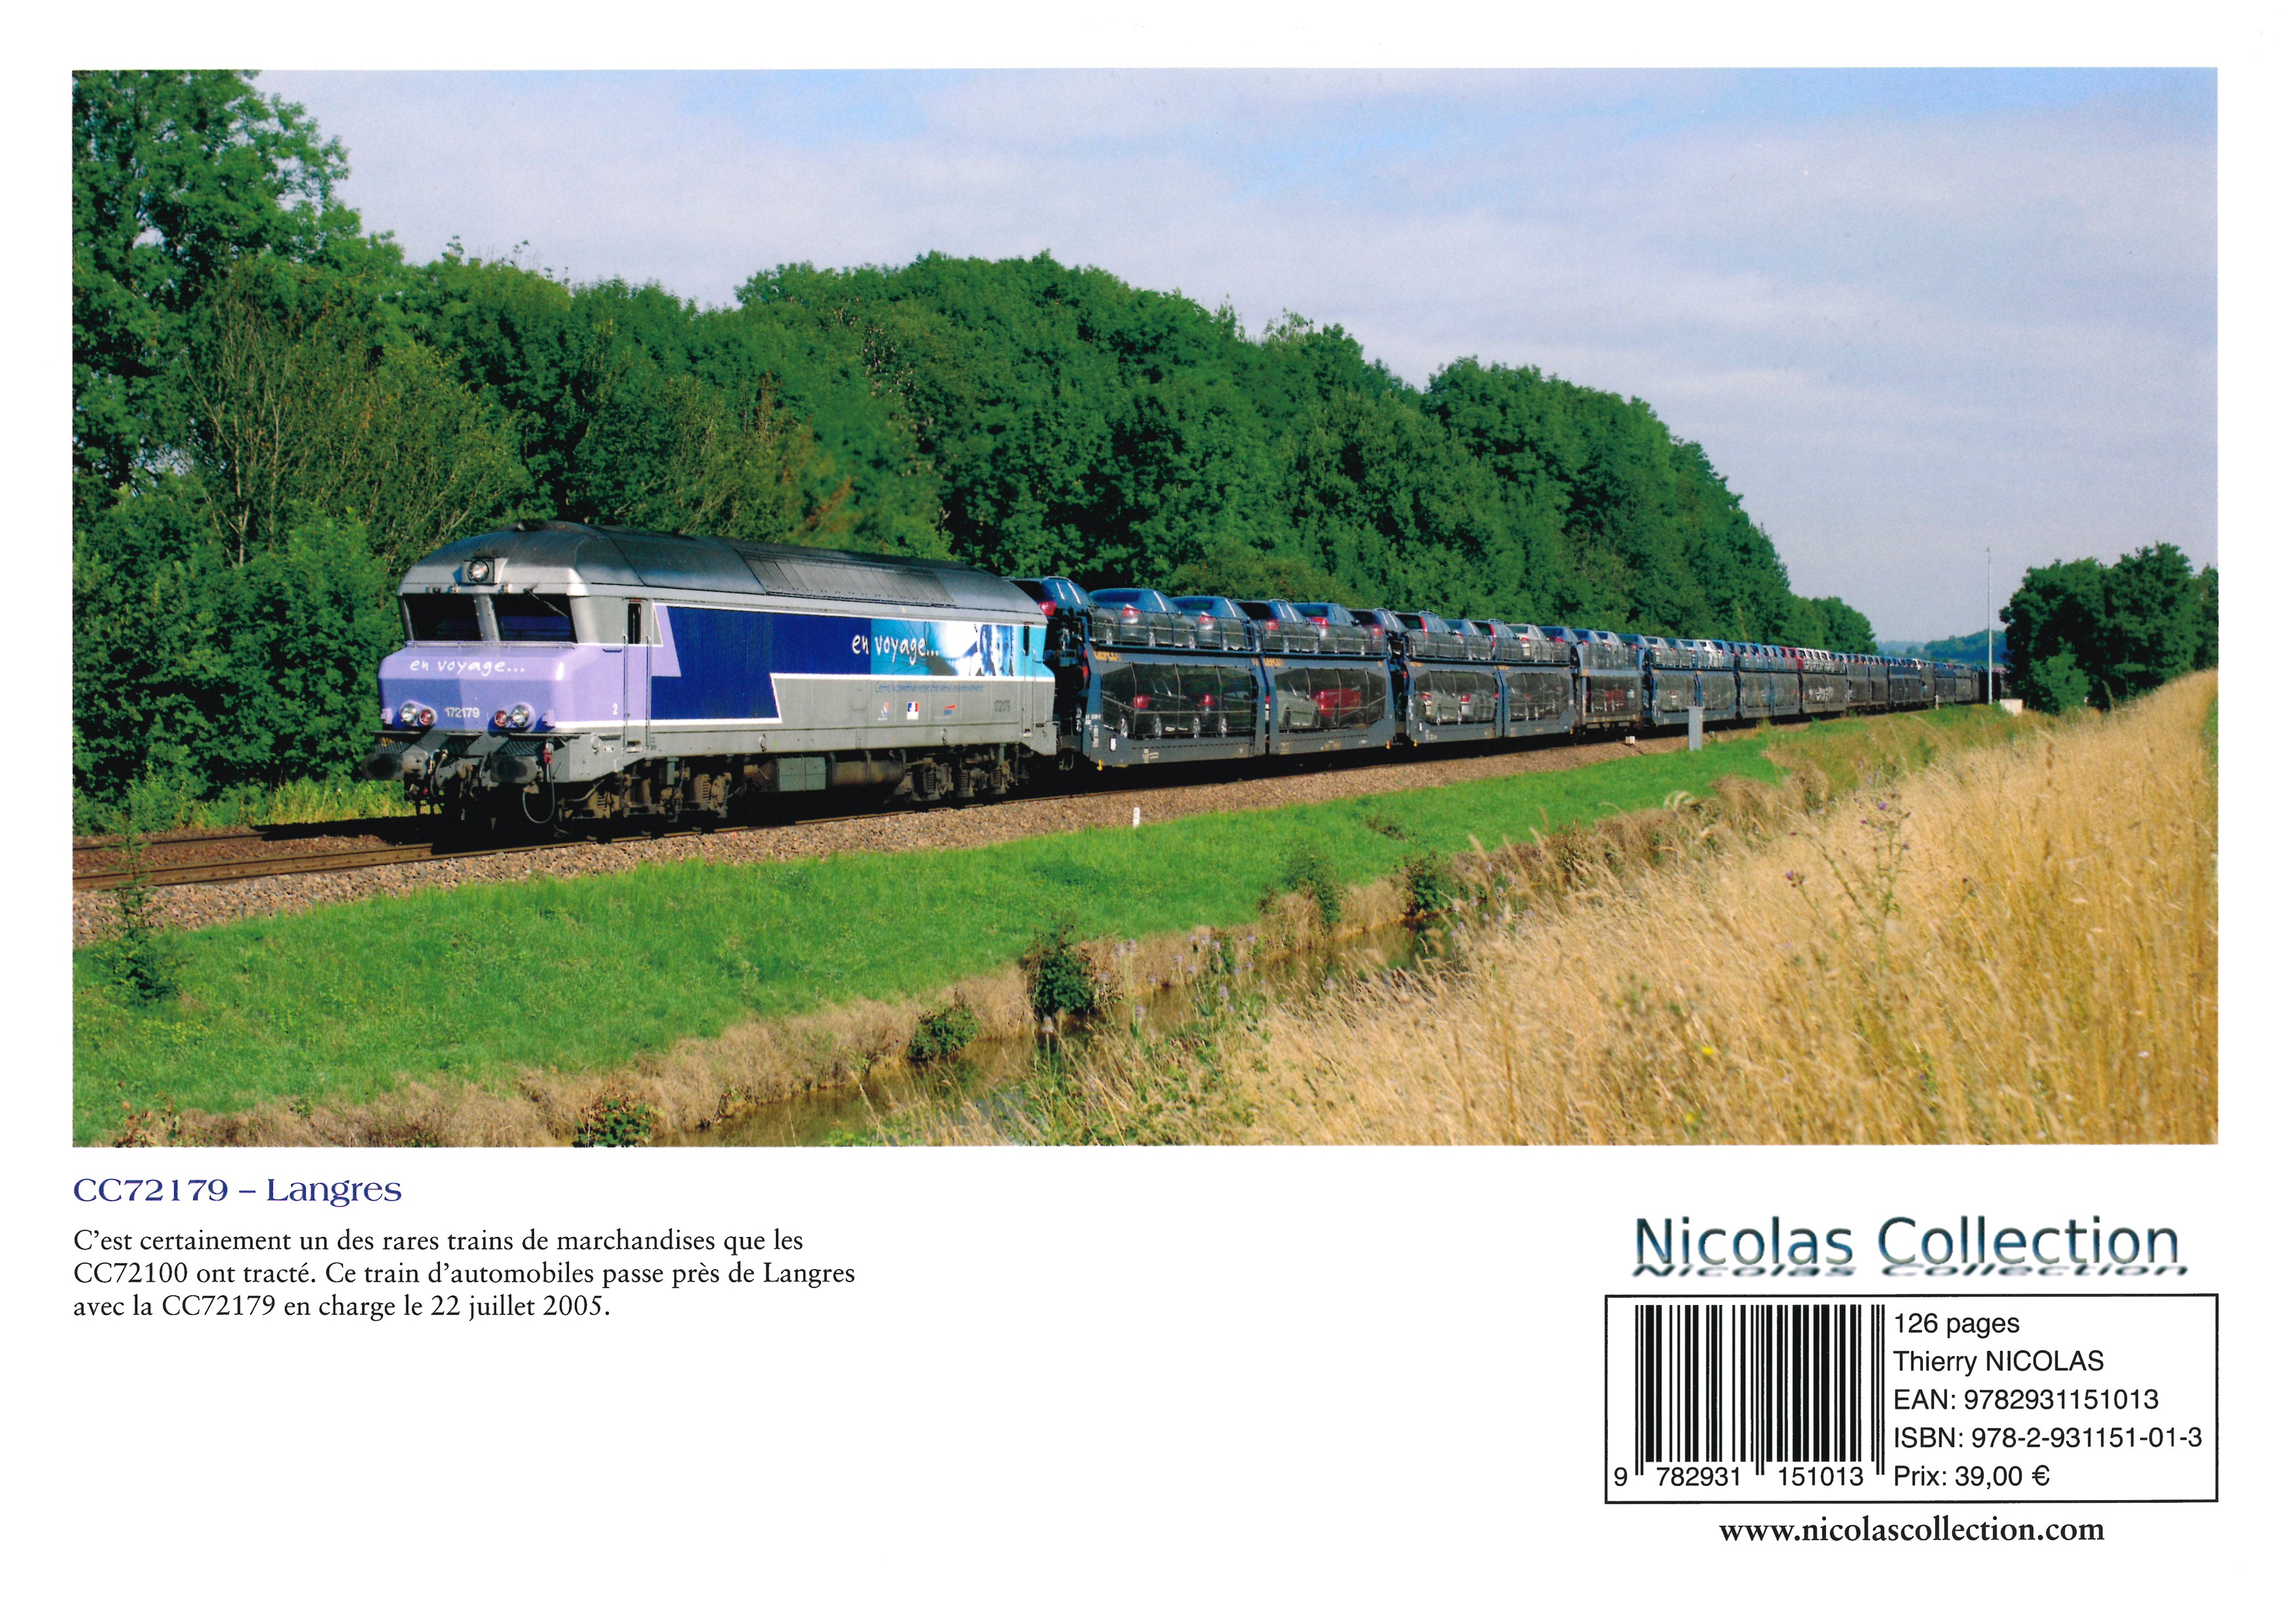 Buch SNCF CC 72100 Thierry Nicolas Collection